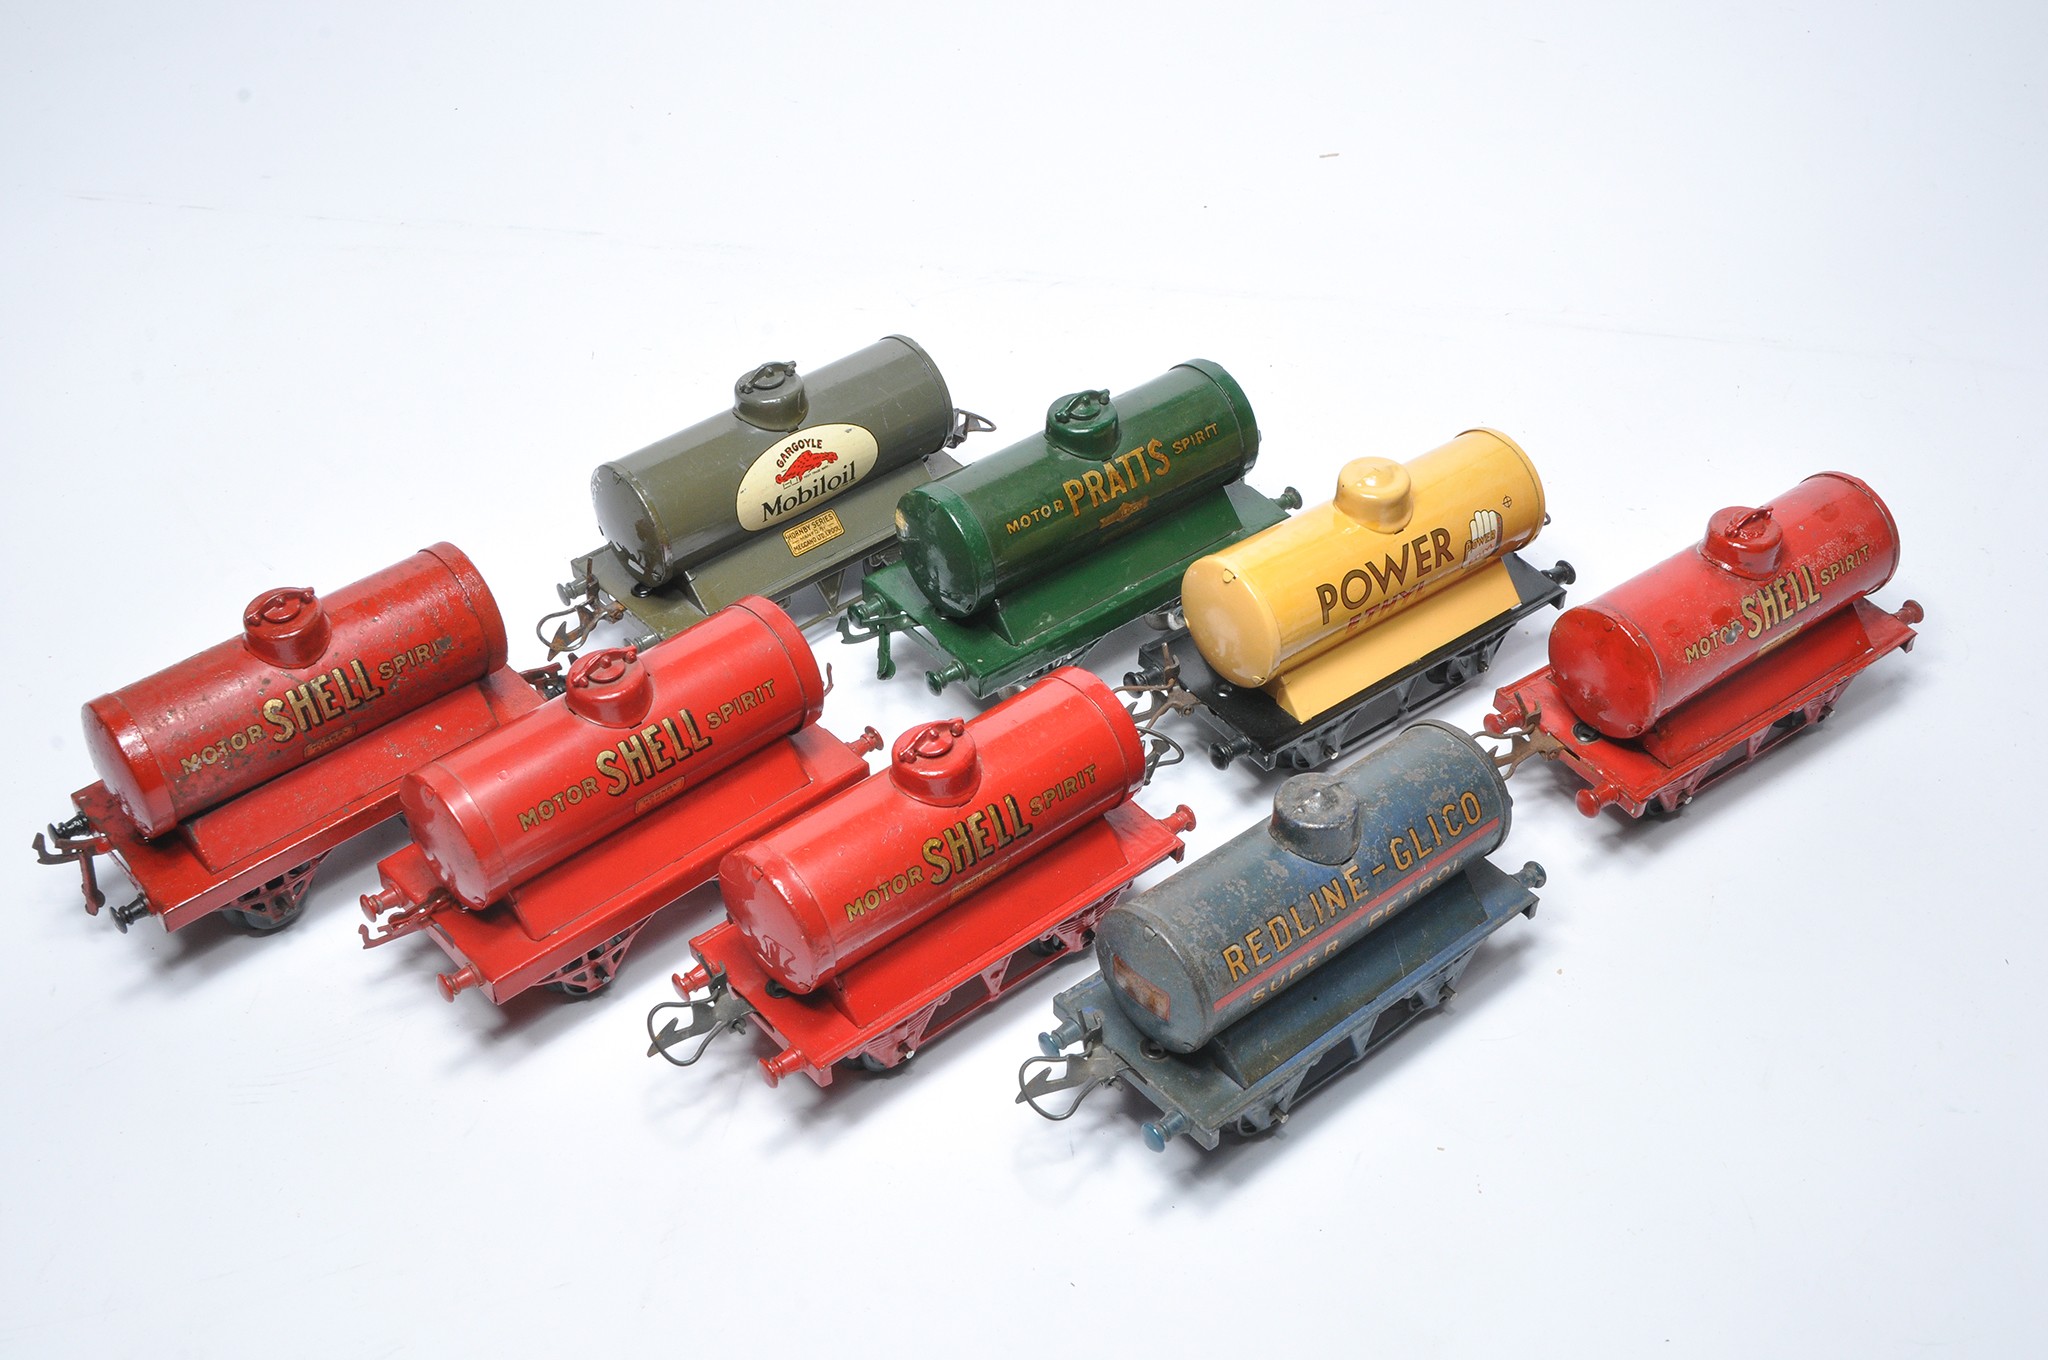 Hornby O Gauge Model Railway group of Eight Tank Wagons with various liveries as shown.